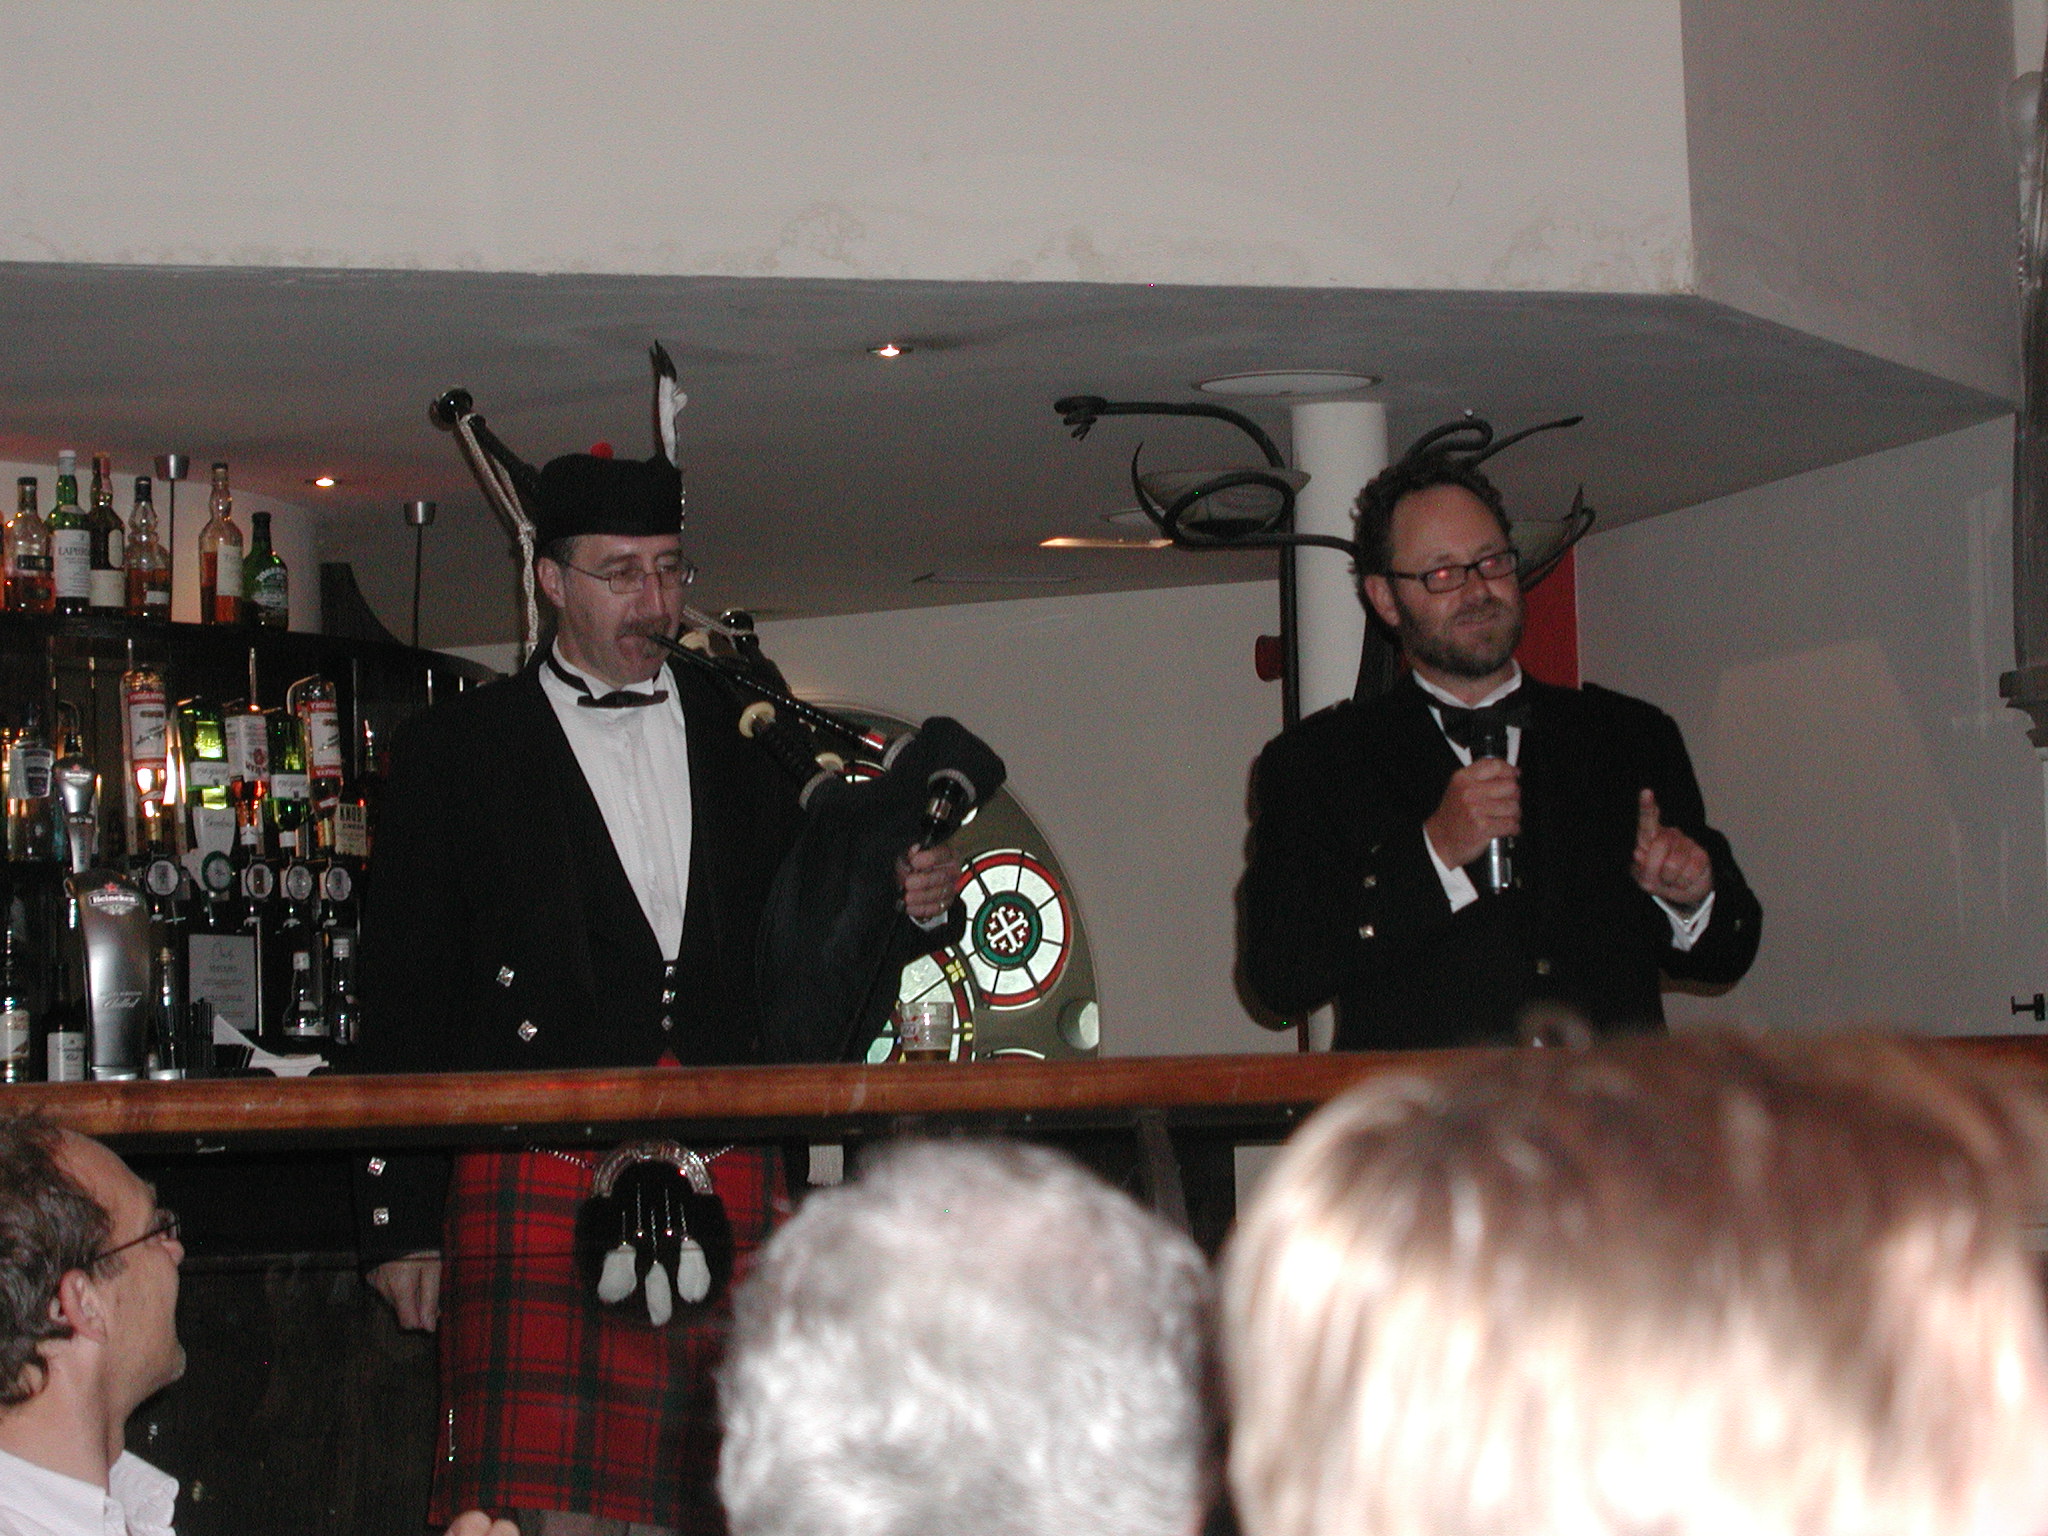 Formal dinner at the FTD 12 meeting in Glasgow in 2010. Image: Michael Simon Krochmal